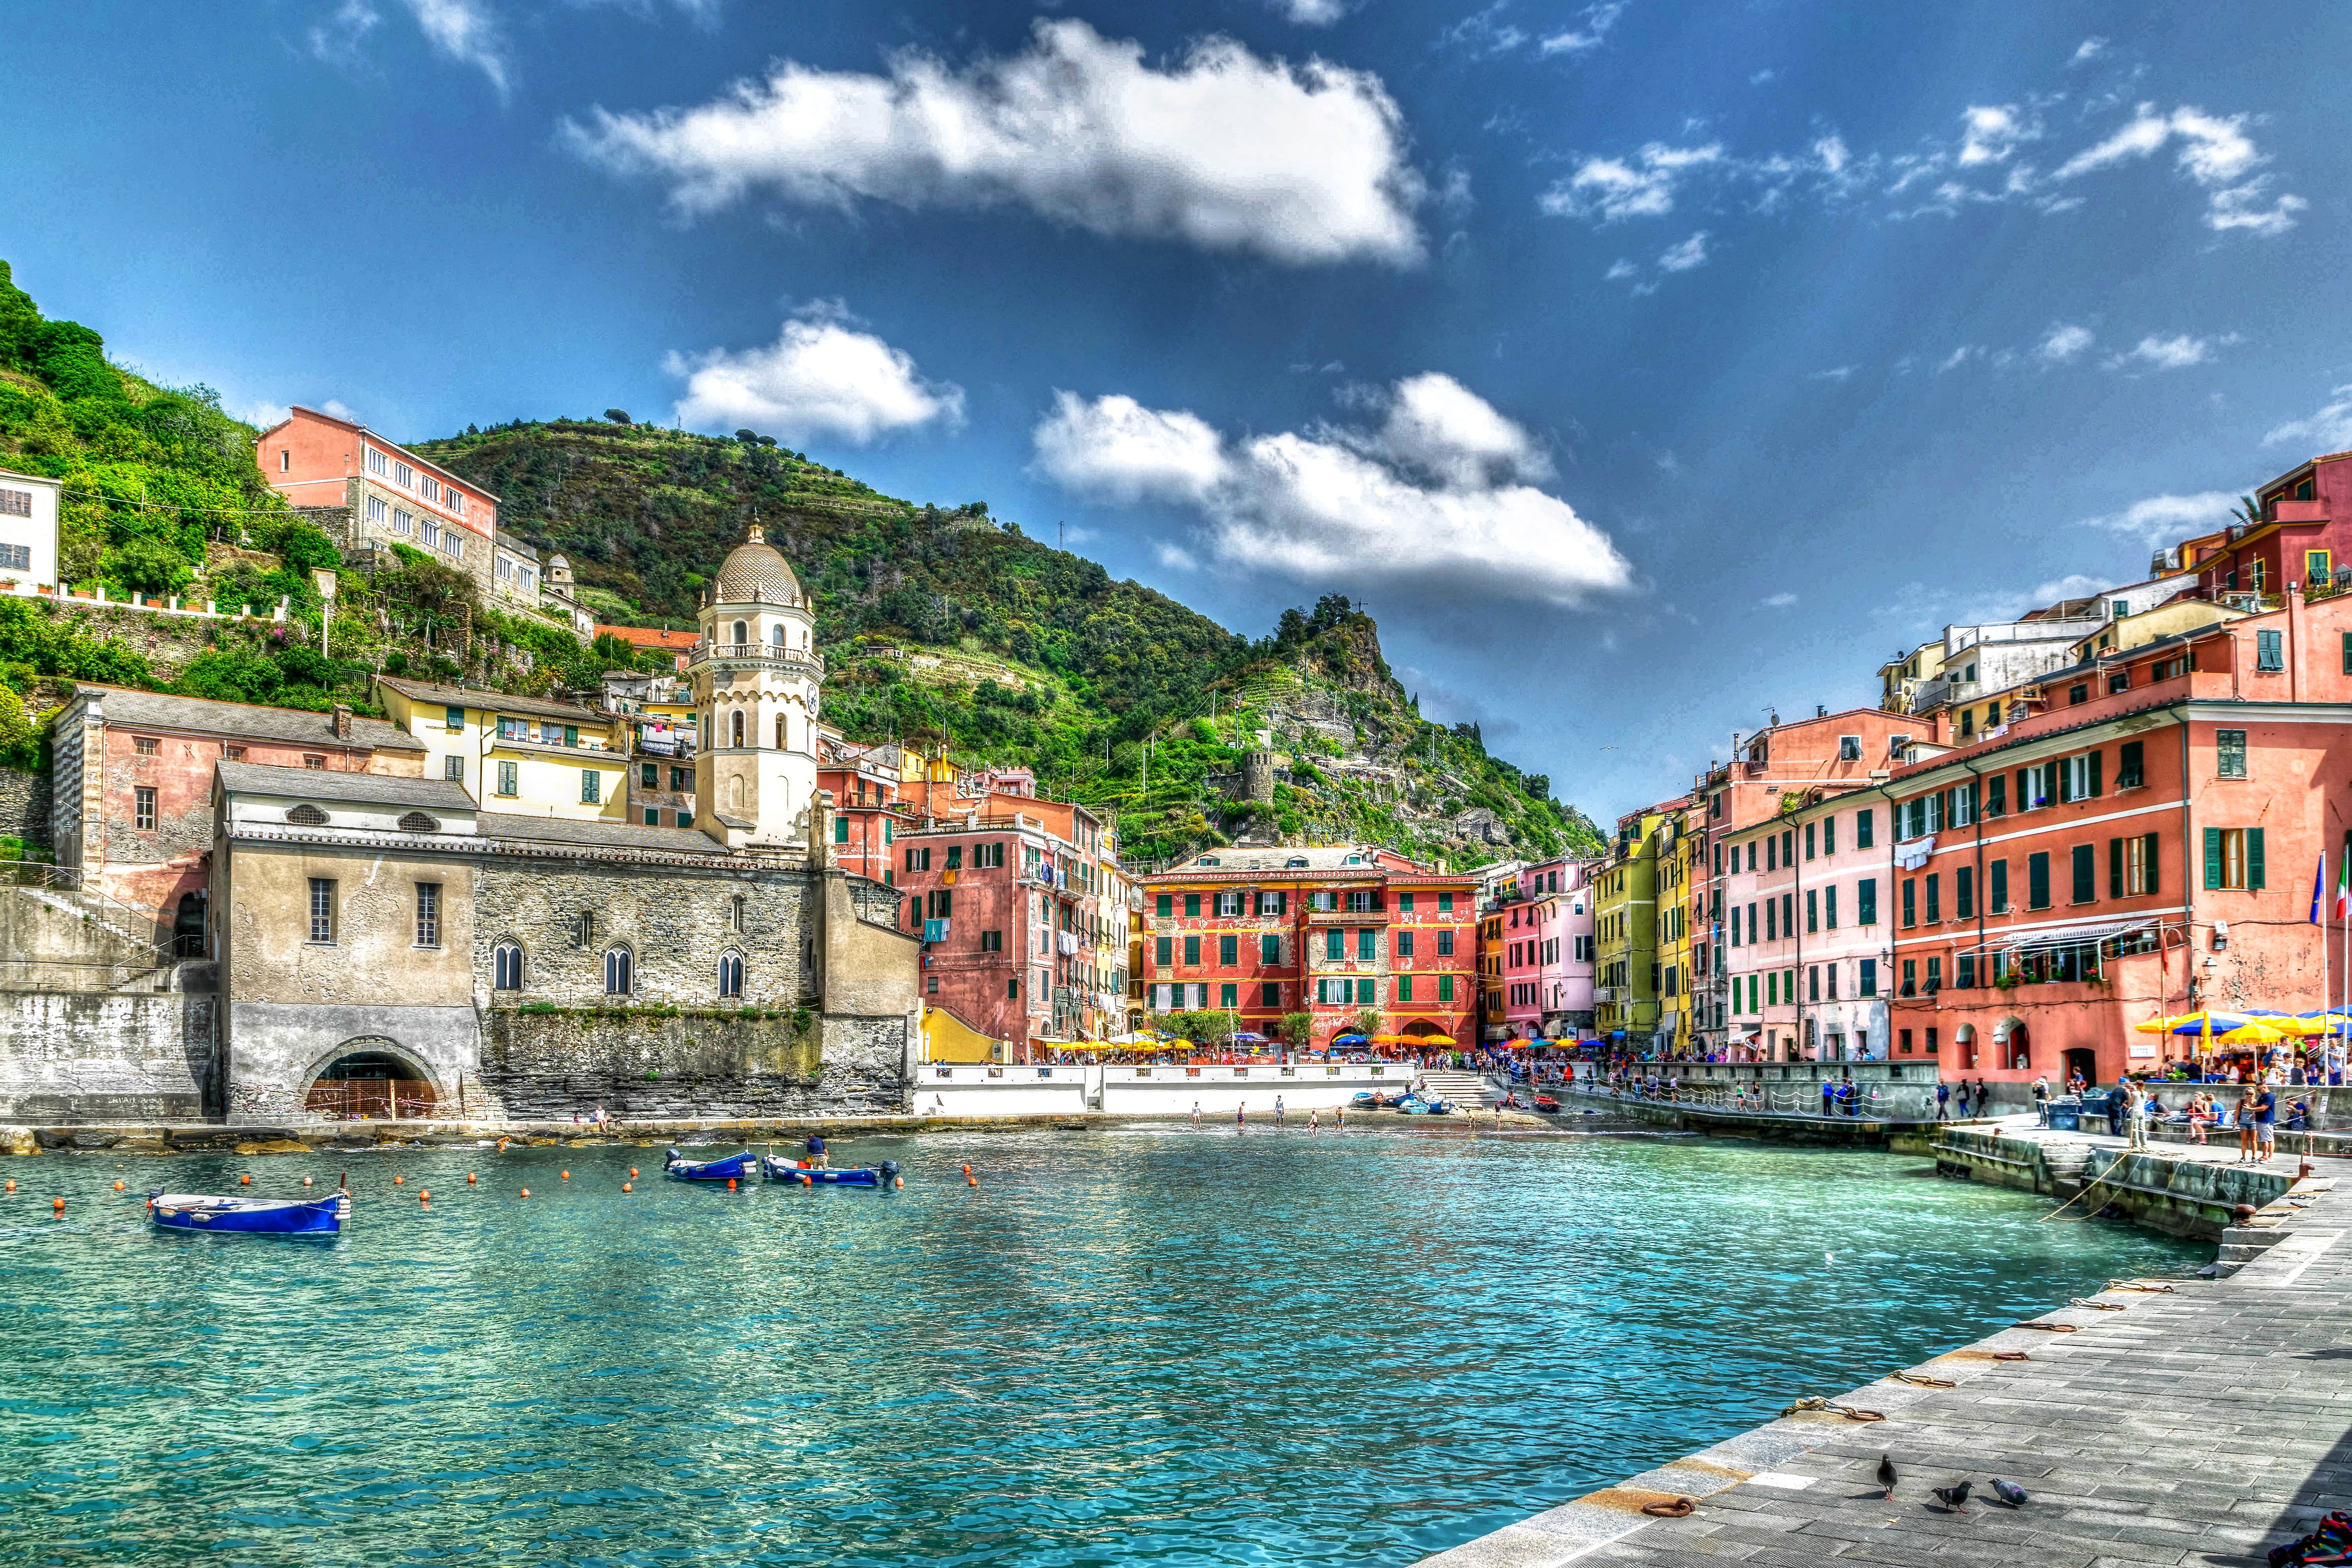 italy, Houses, Boats, Hdr, Clouds, Manarola, Hafen, Cities Wallpaper